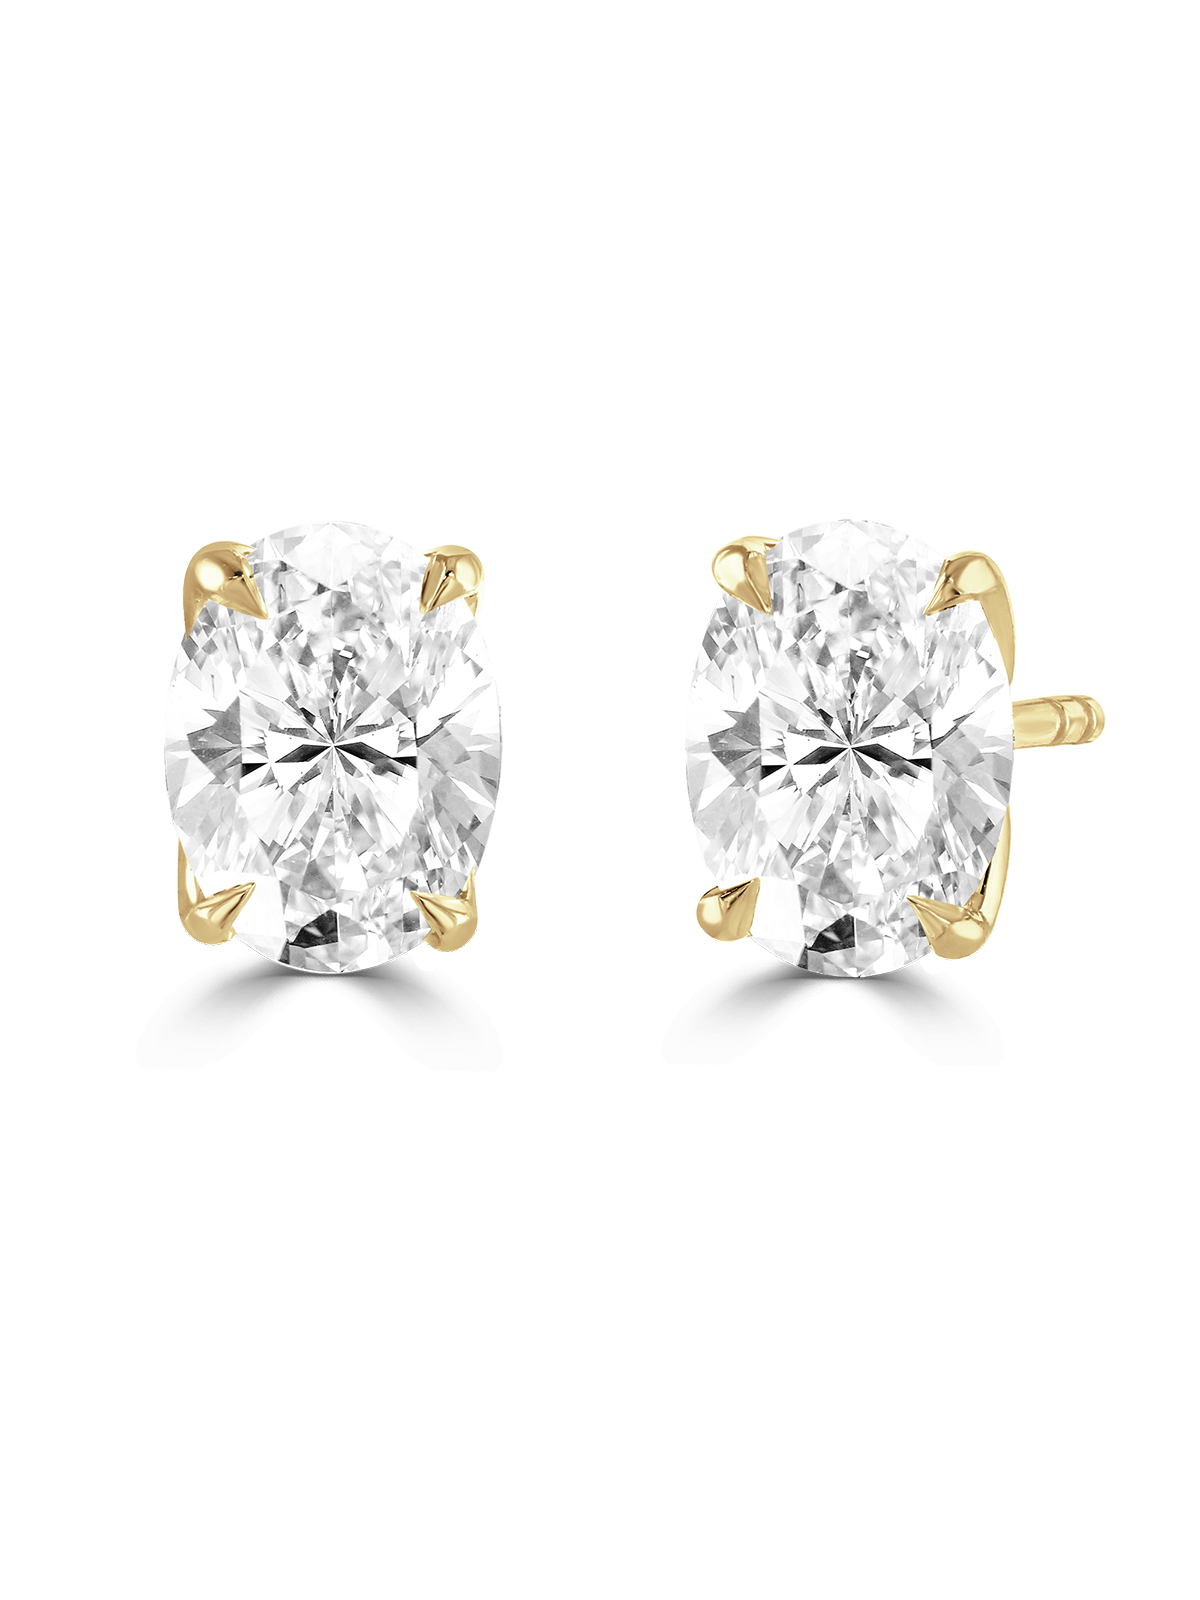 "Iris" Approx 2.00ct Oval Cut Lab Grown Diamond Solitaire Stud Earrings in 18ct Yellow Gold